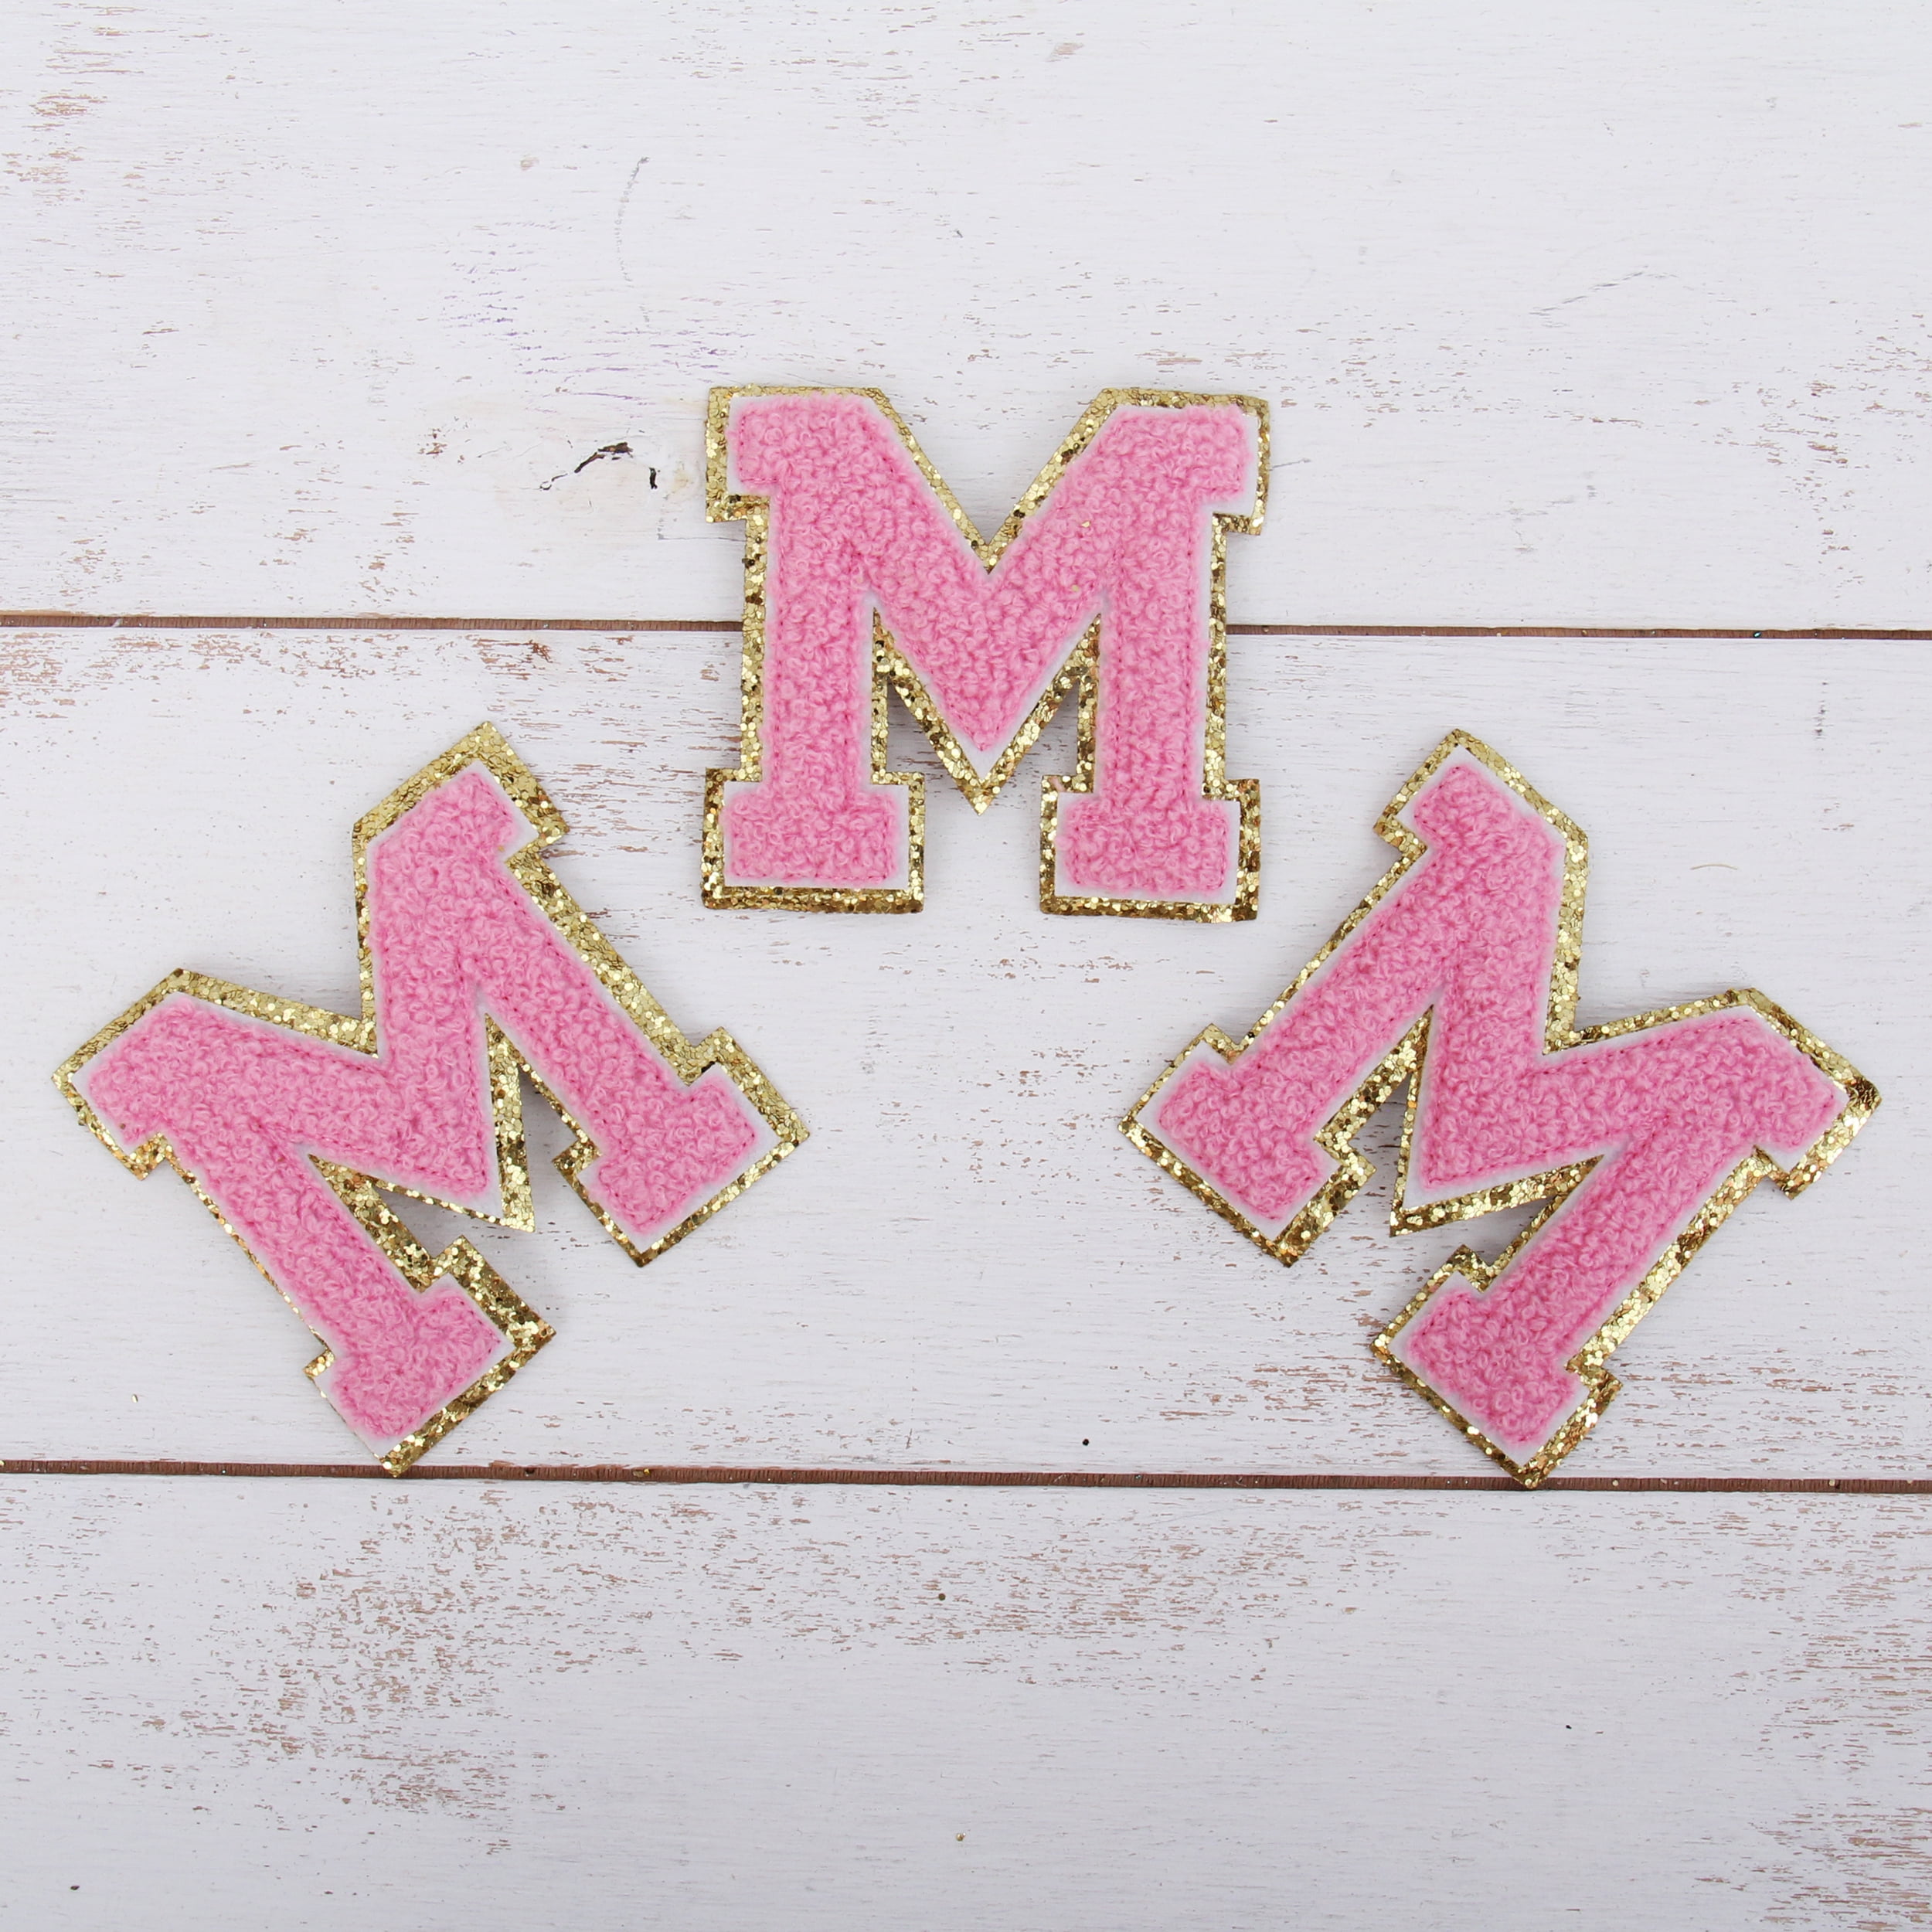 hoppe crush publikum 3 Pack Chenille Iron On Glitter Varsity Letter "M" Patches - Pink Chenille  Fabric With Gold Glitter Trim - Sew or Iron on - 5.5 cm Tall - Walmart.com